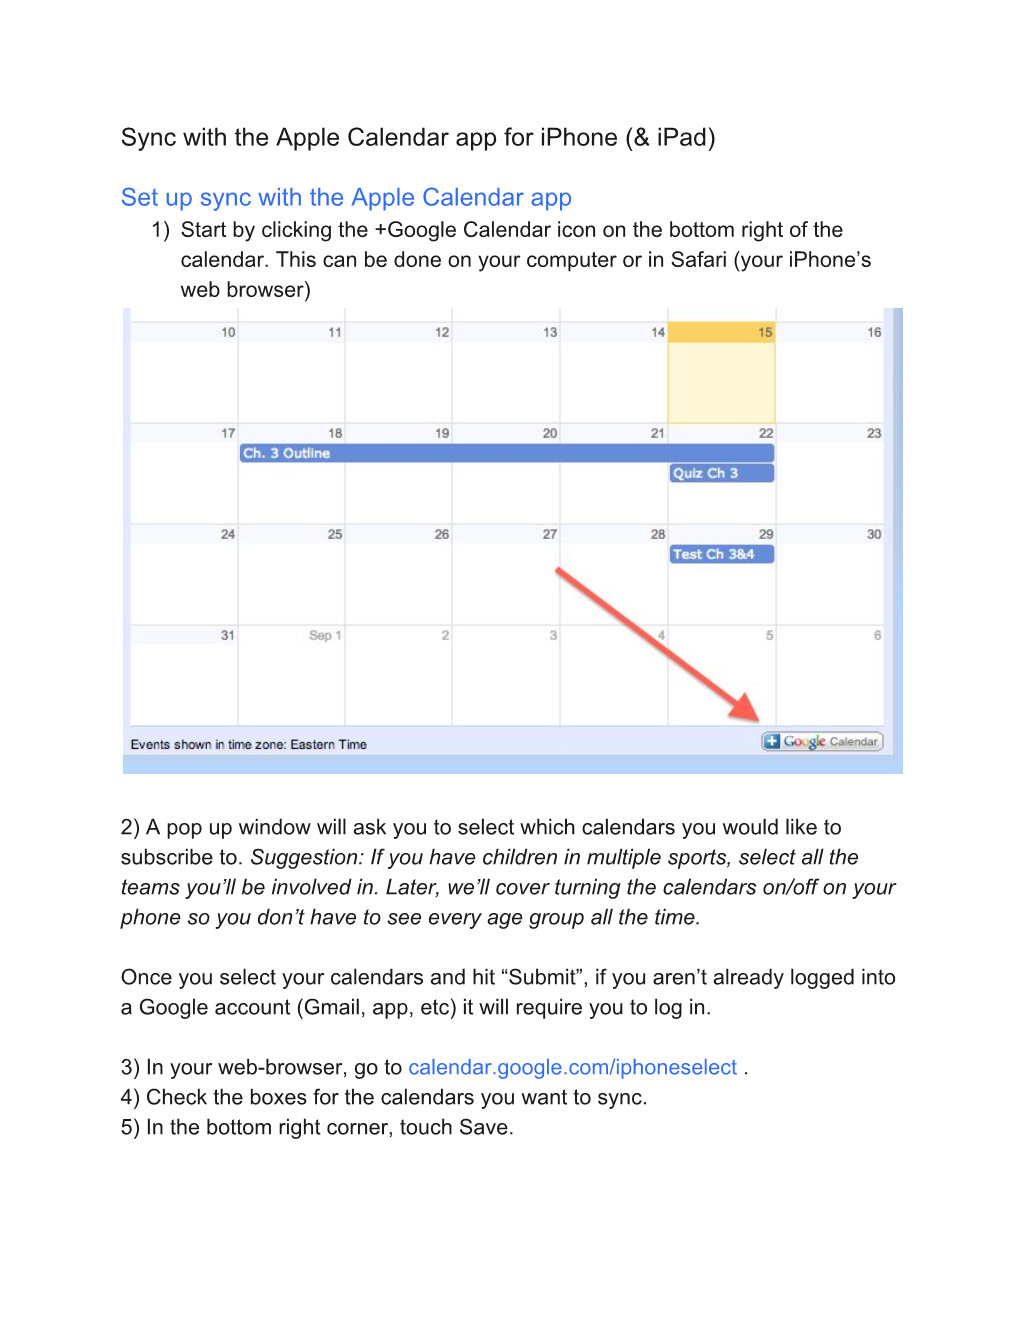 Sync with the Apple Calendar App for Iphone (& Ipad) Set up Sync With